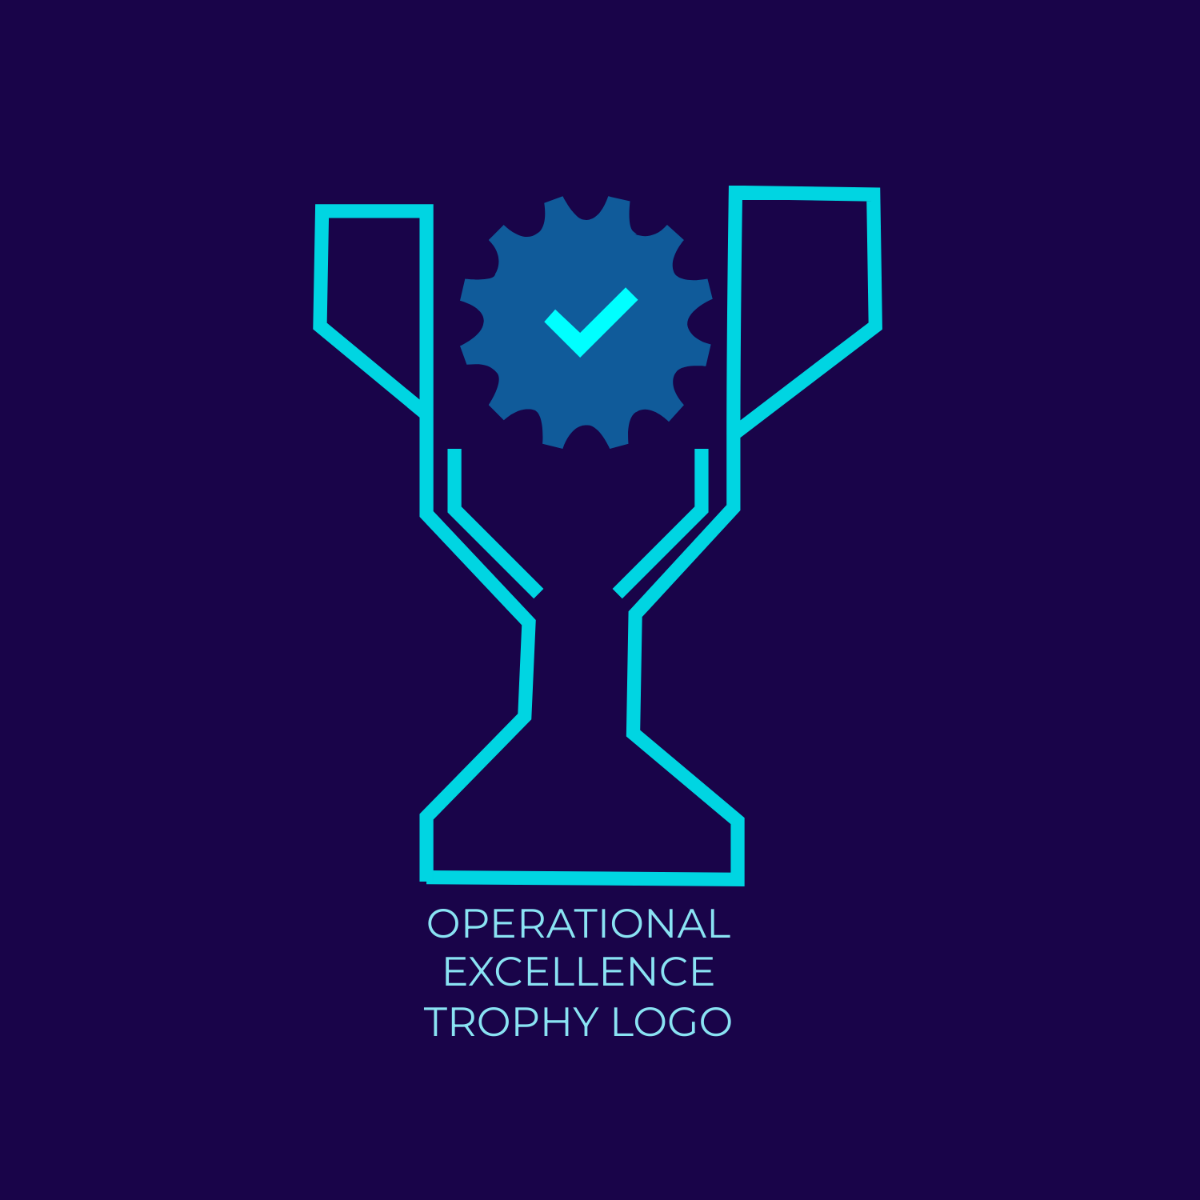 Operational Excellence Trophy Logo